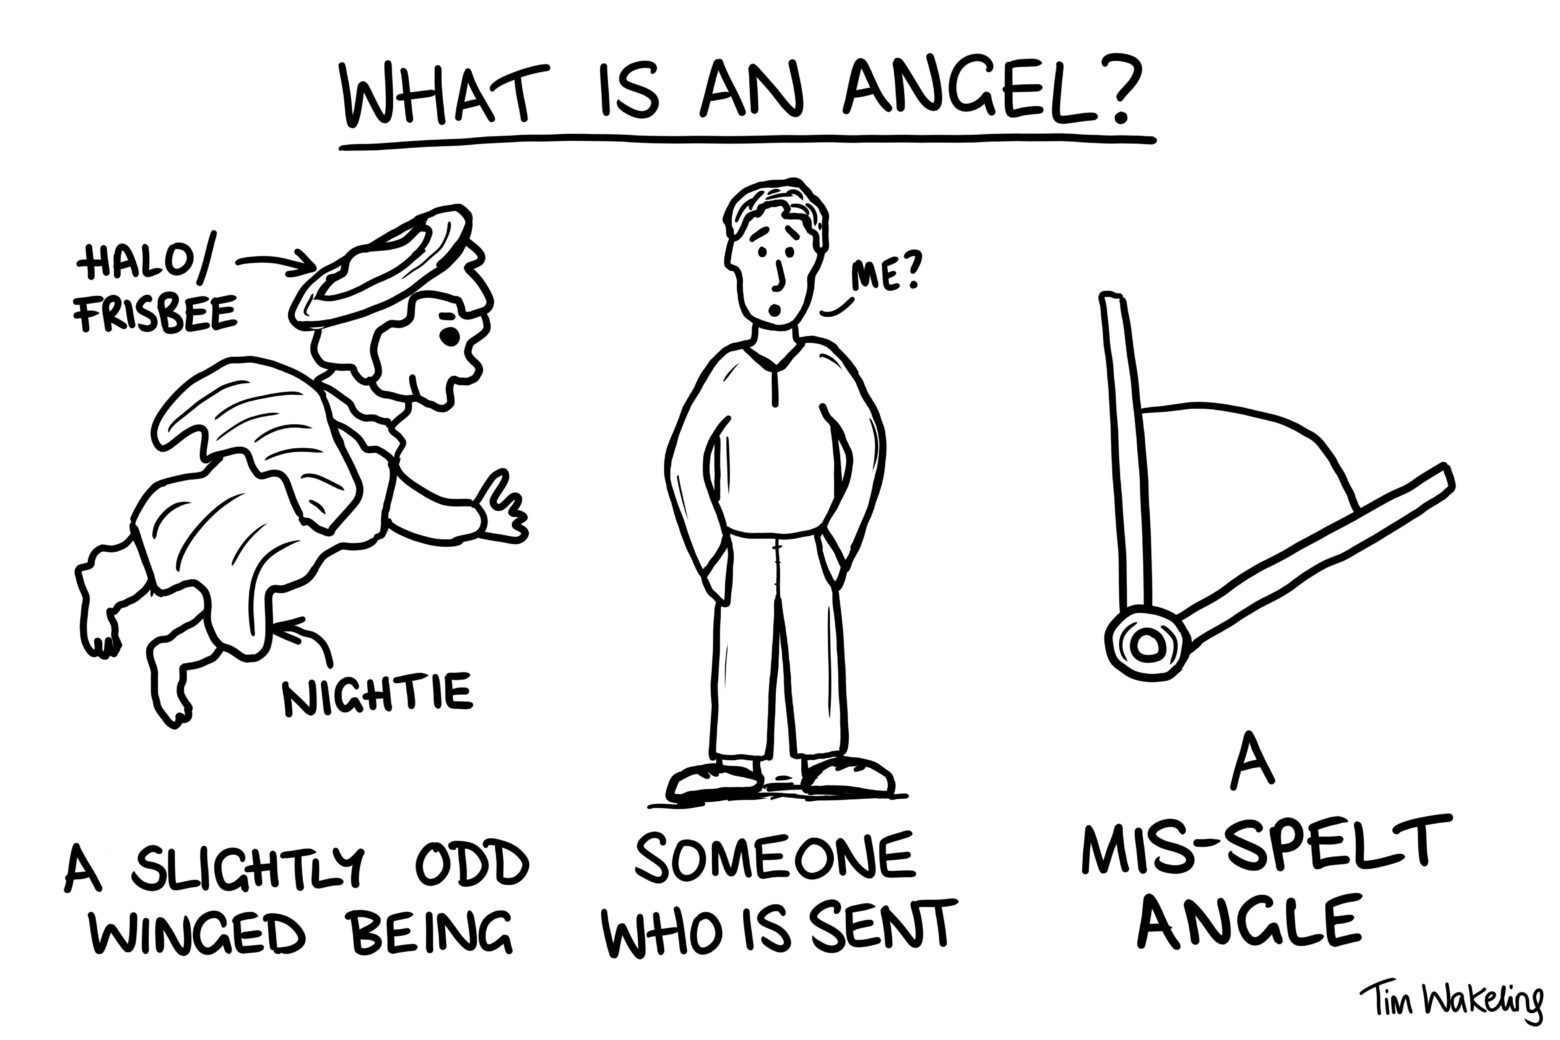 What is an angel?